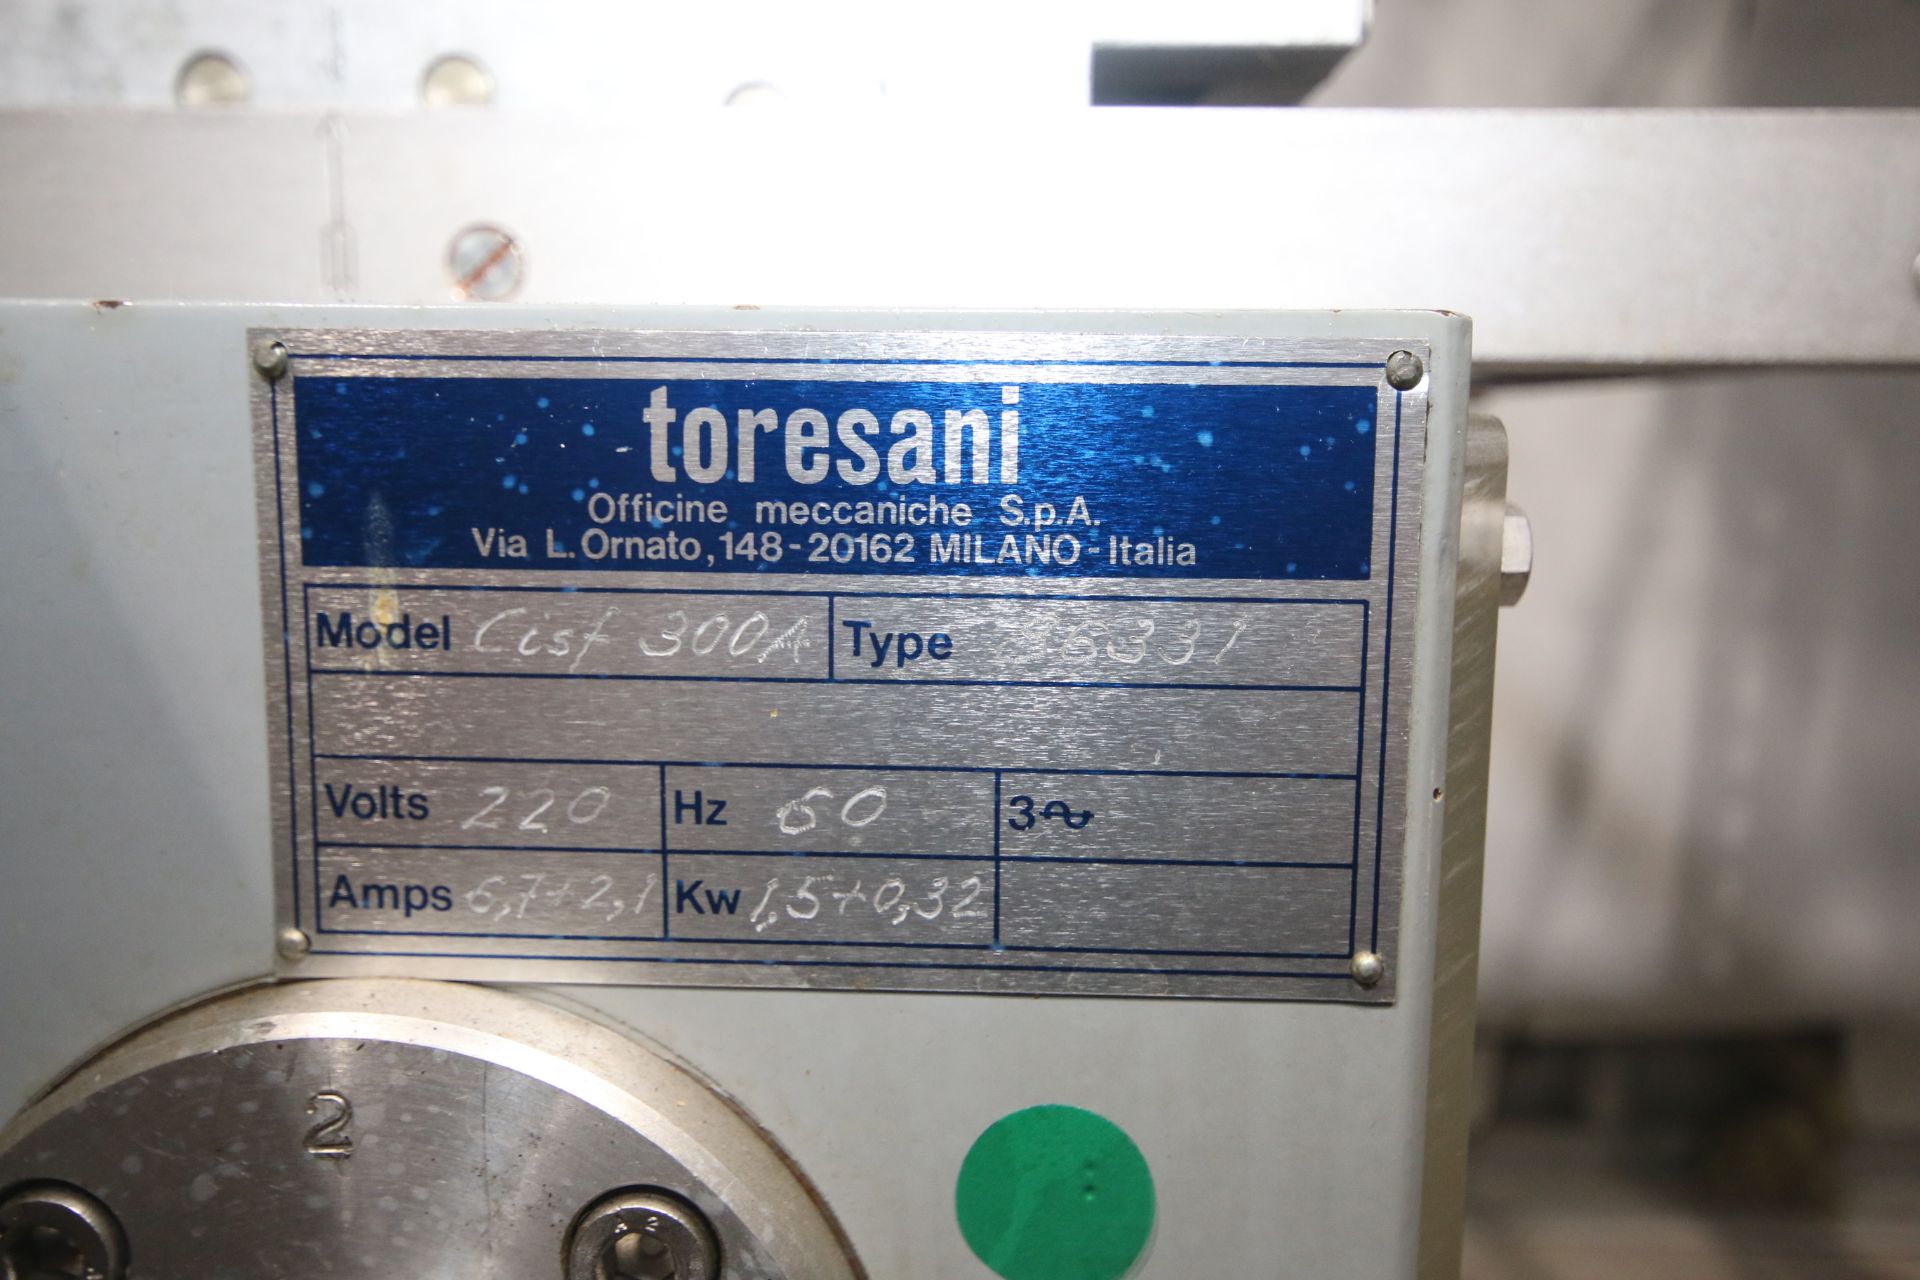 Toresani 12" W Sheeter/Cutter, Model C1SF300A, Type 8633, Model with Aprox. 15" W Outfeed Conveyor - Image 6 of 6